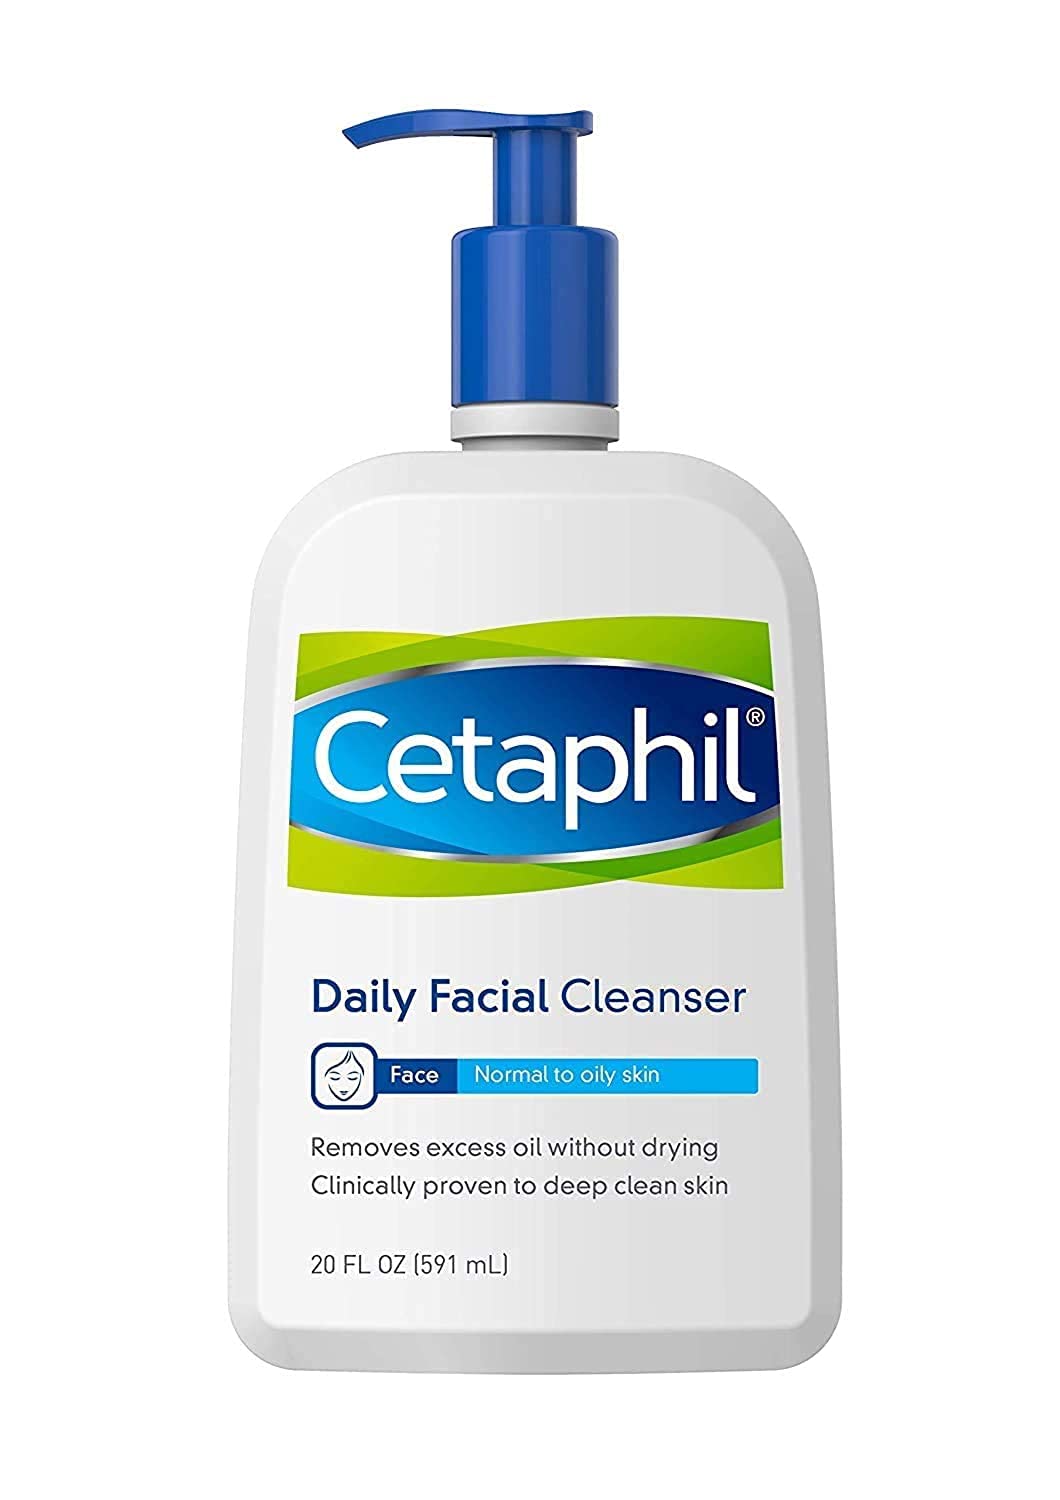 Face Wash by CETAPHIL, Daily Facial Cleanser for Sensitive, Combination to Oily Skin, 20 oz, Gentle Foaming, Soap Free, Hypoallergenic